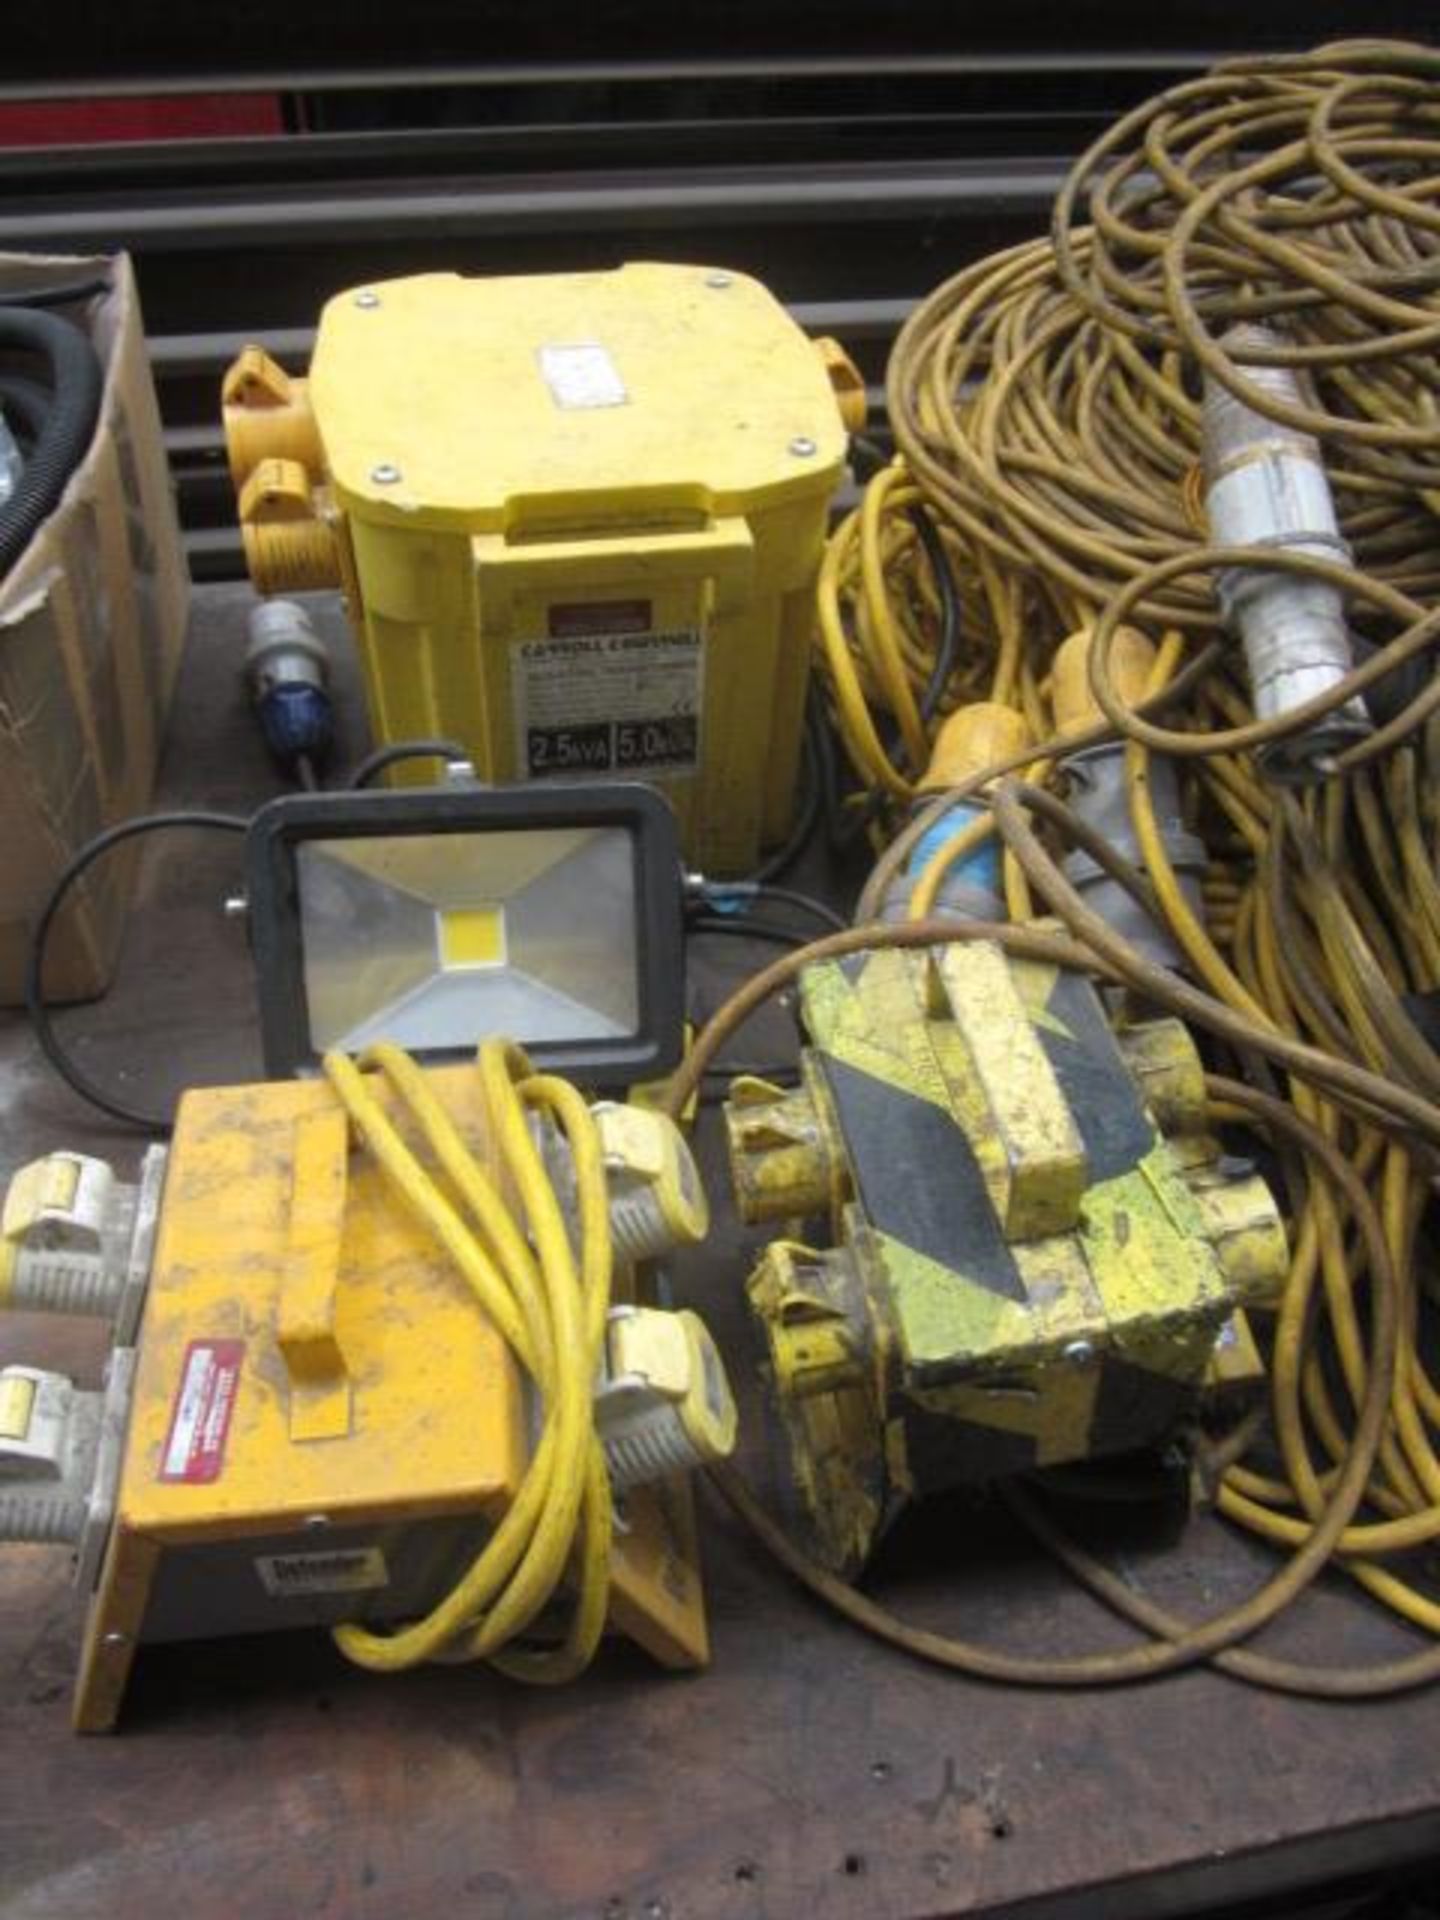 Assorted 110v site equipment including transformer, site lights, splitter boxes, reeled cable - Image 2 of 5